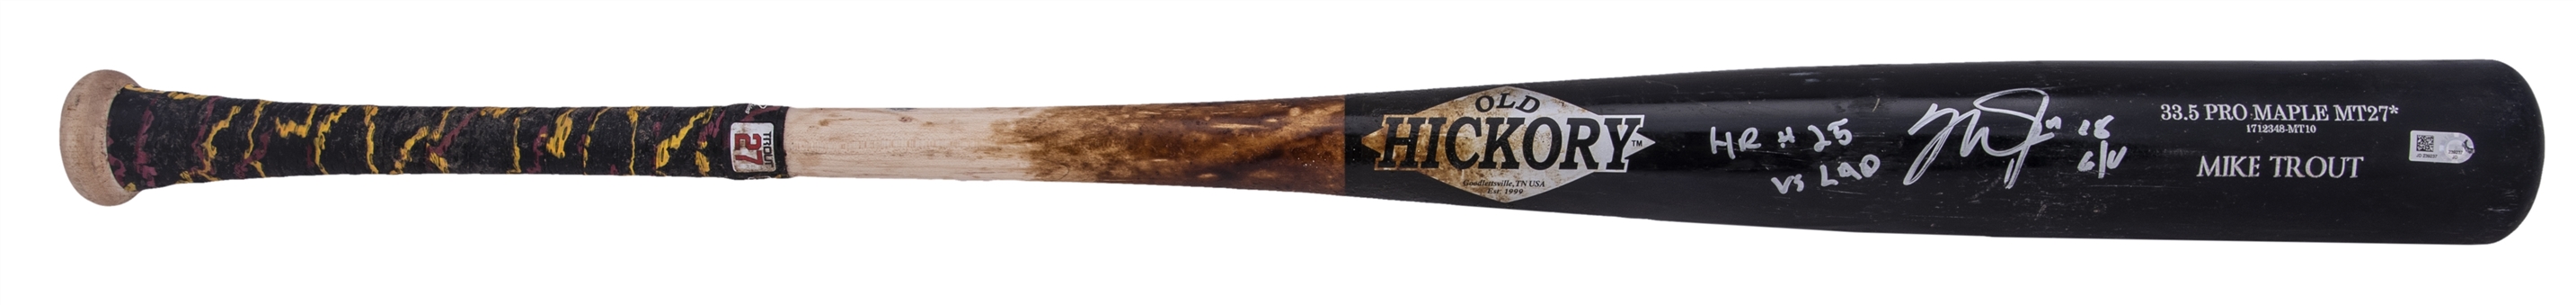 2018 Mike Trout Game Used & Signed 25th Home Run Old Hickory Bat Inscribed "Home Run #25 Vs. LAD" (MLB Authenticated & Anderson)